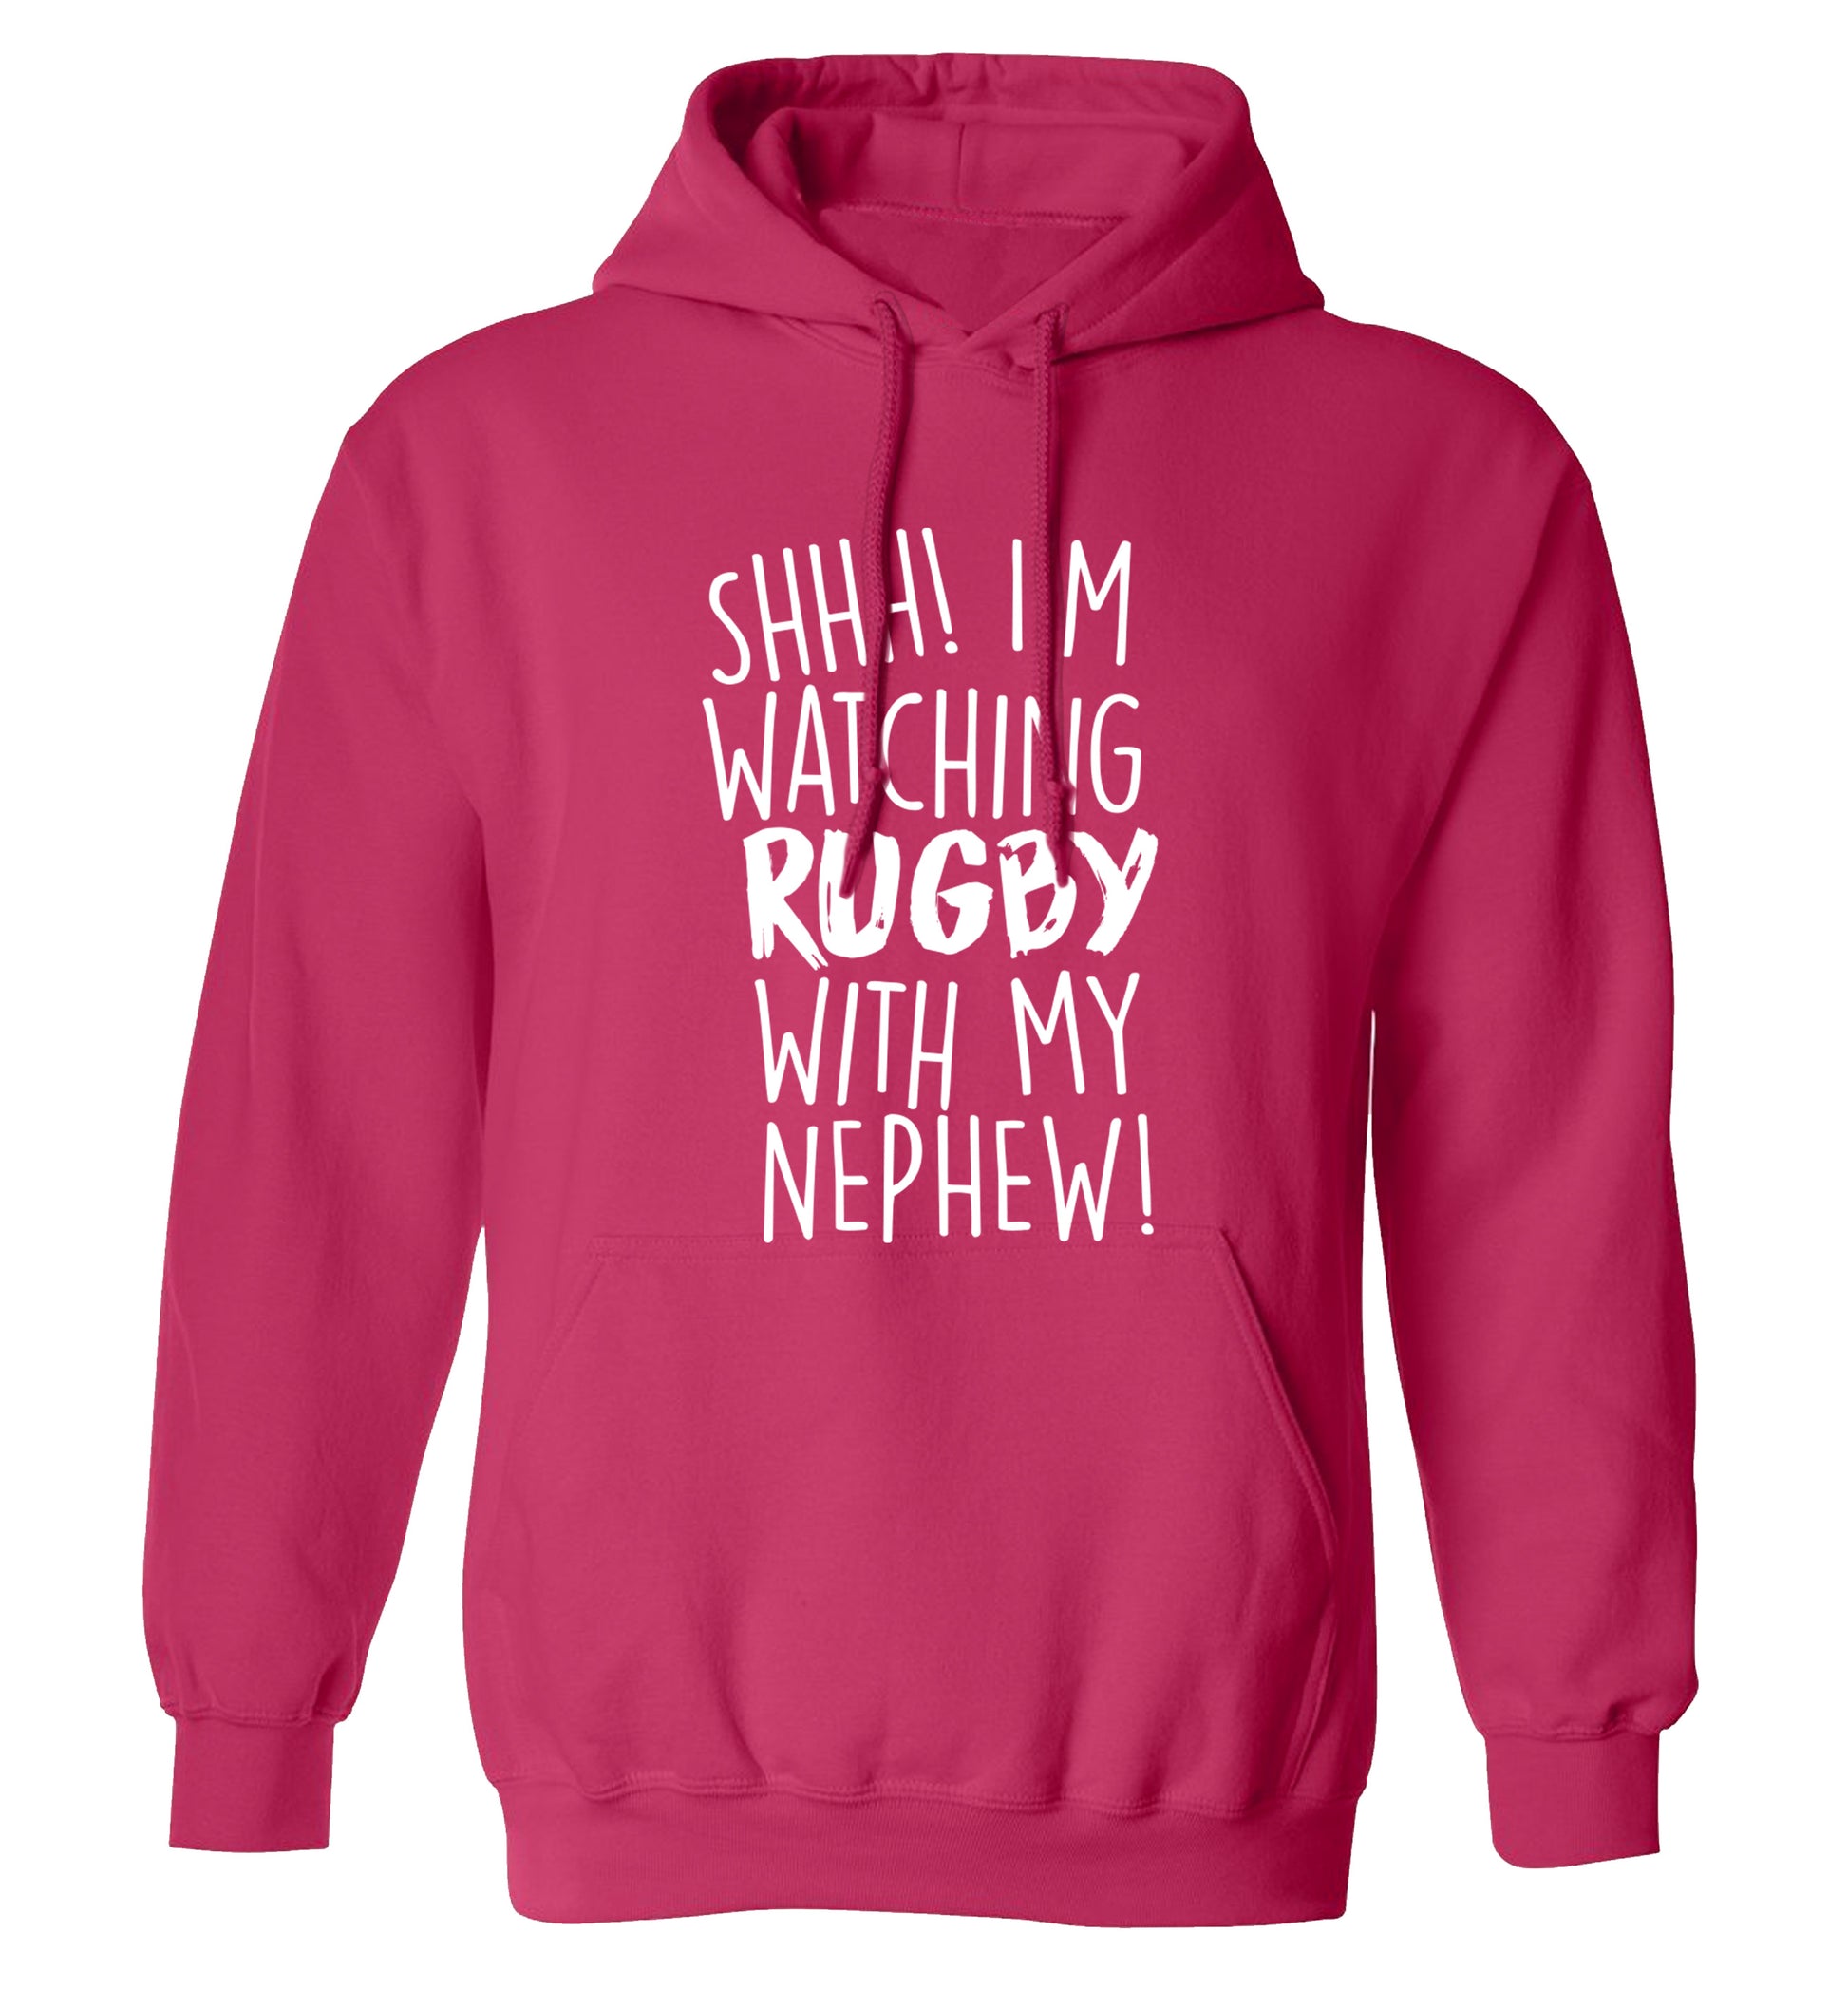 Shh.. I'm watching rugby with my nephew adults unisex pink hoodie 2XL